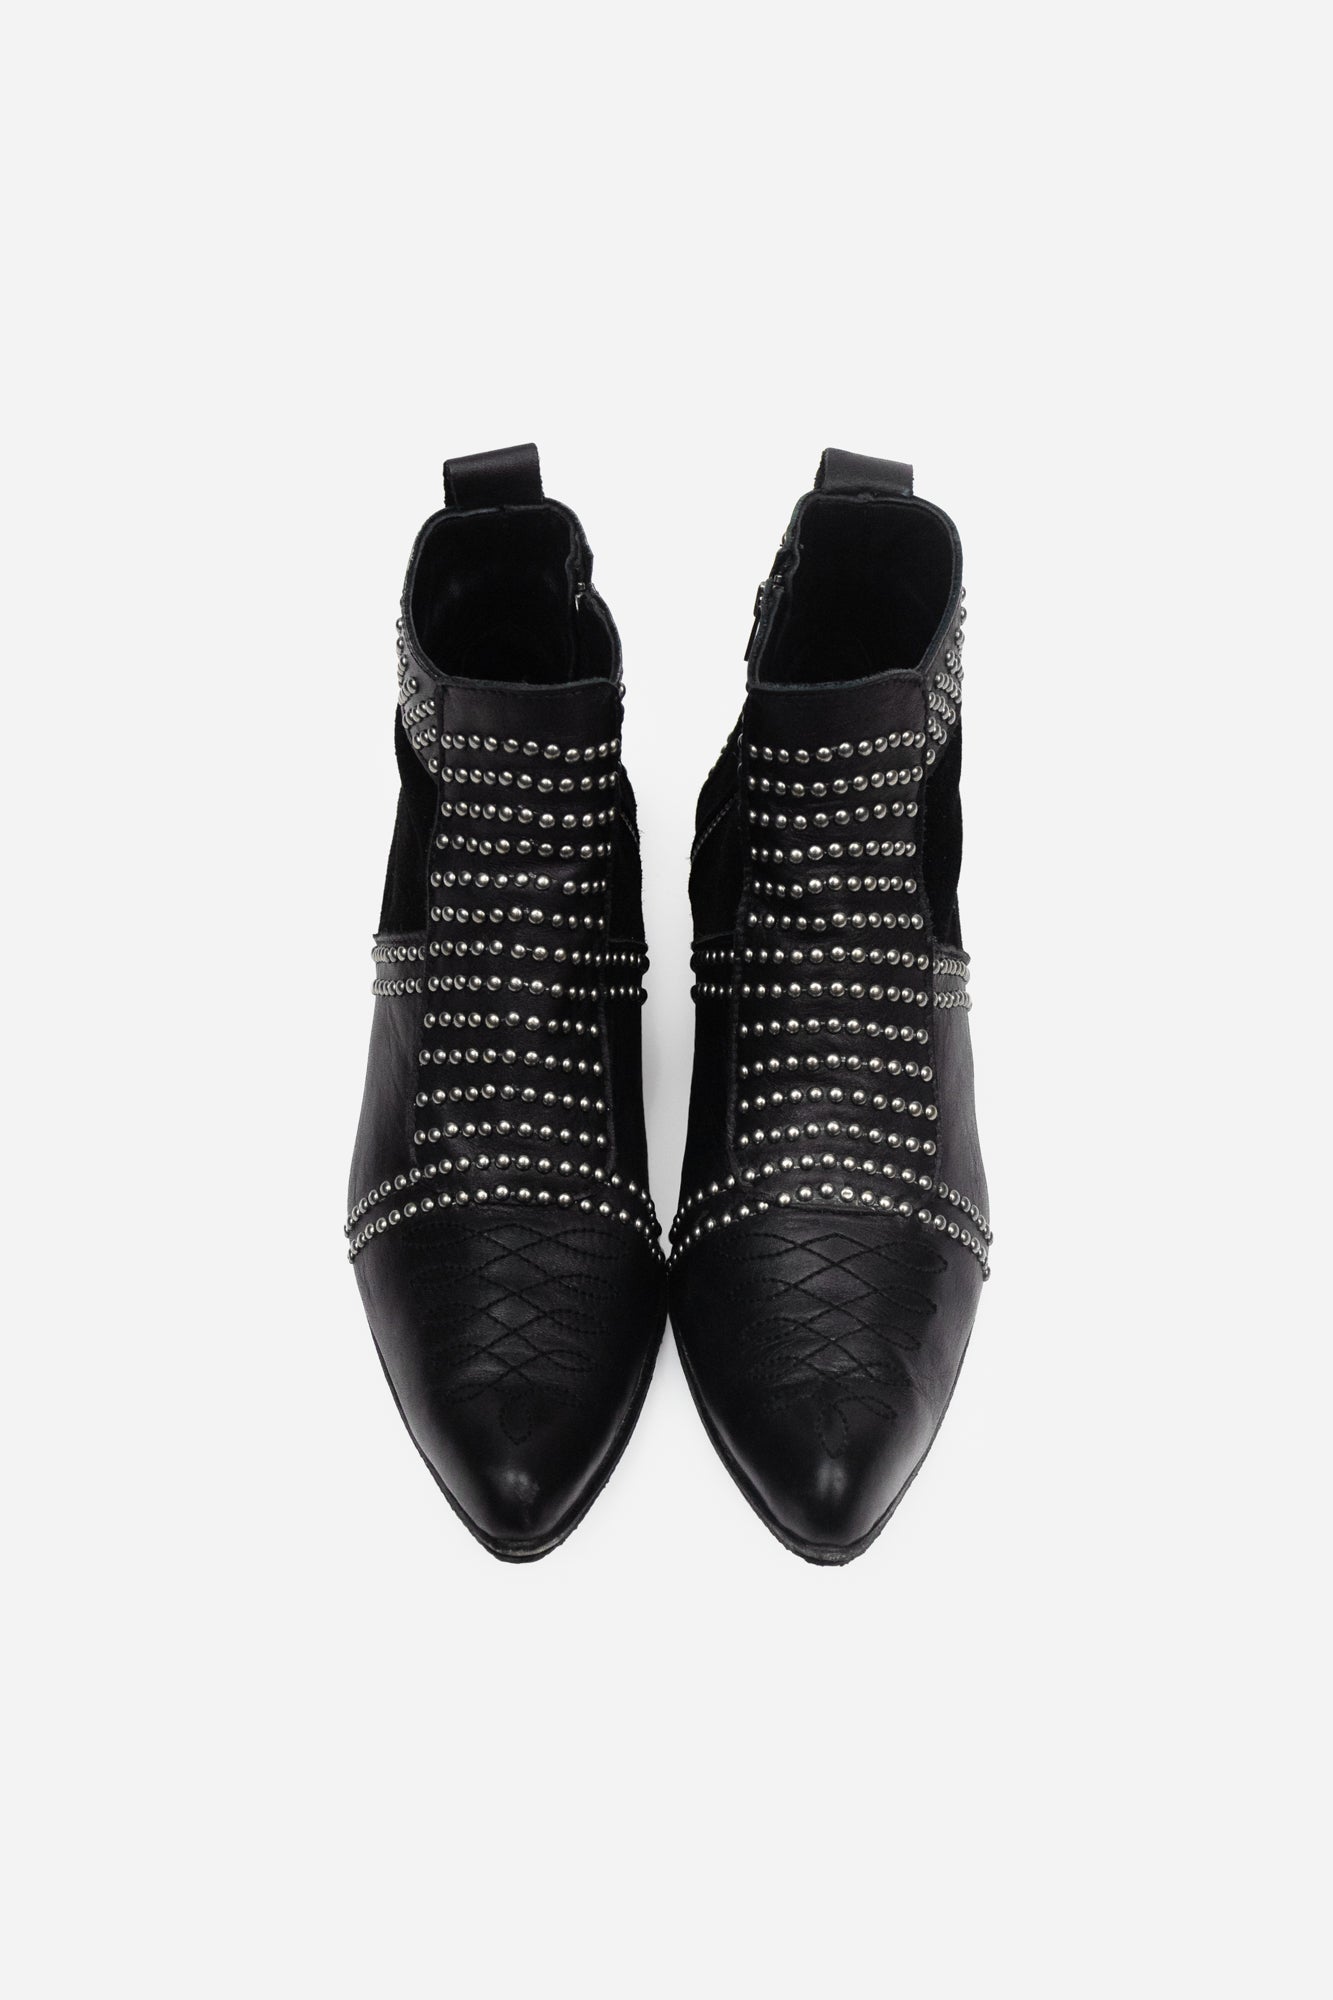 Black Leather Studded Pointed Toe Ankle Boots